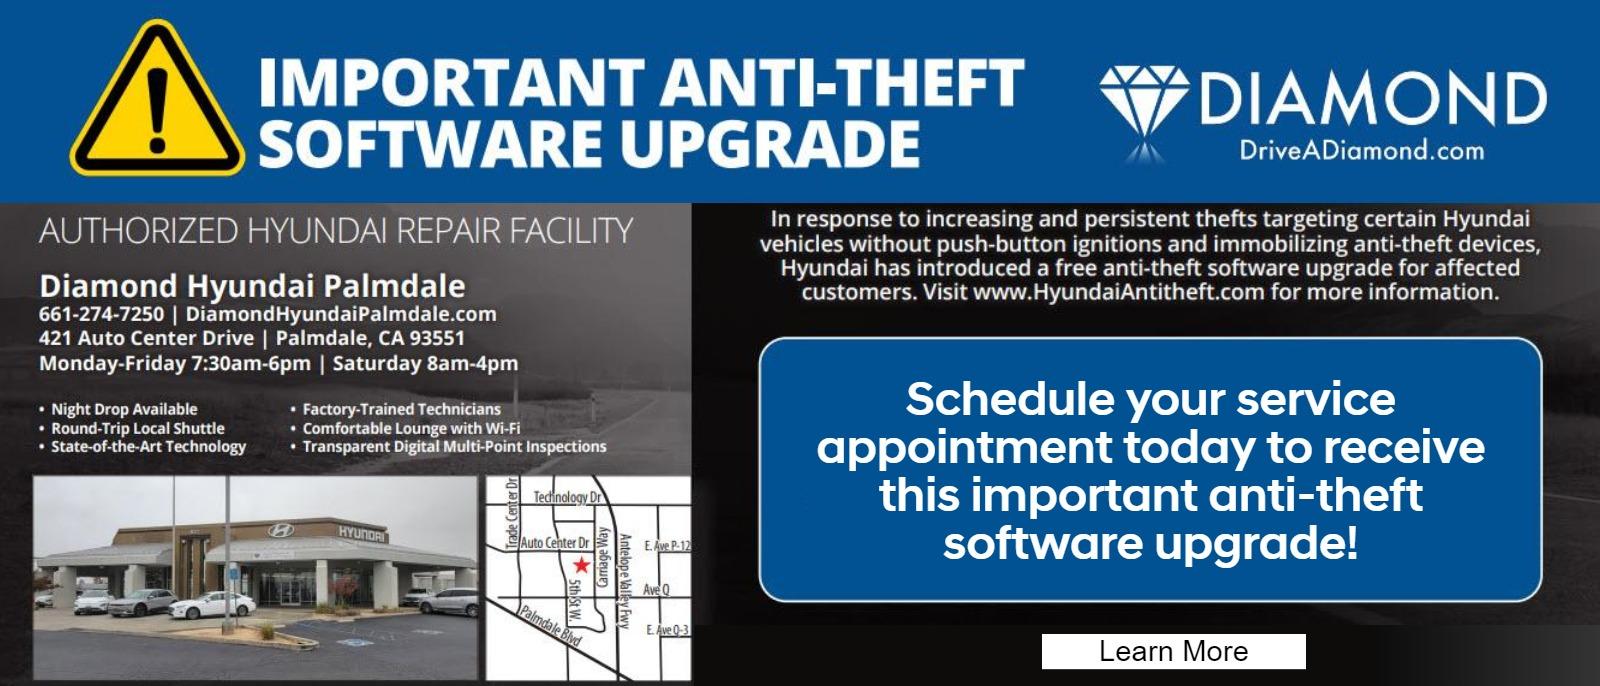 Anti-Theft Software Upgrade clinic